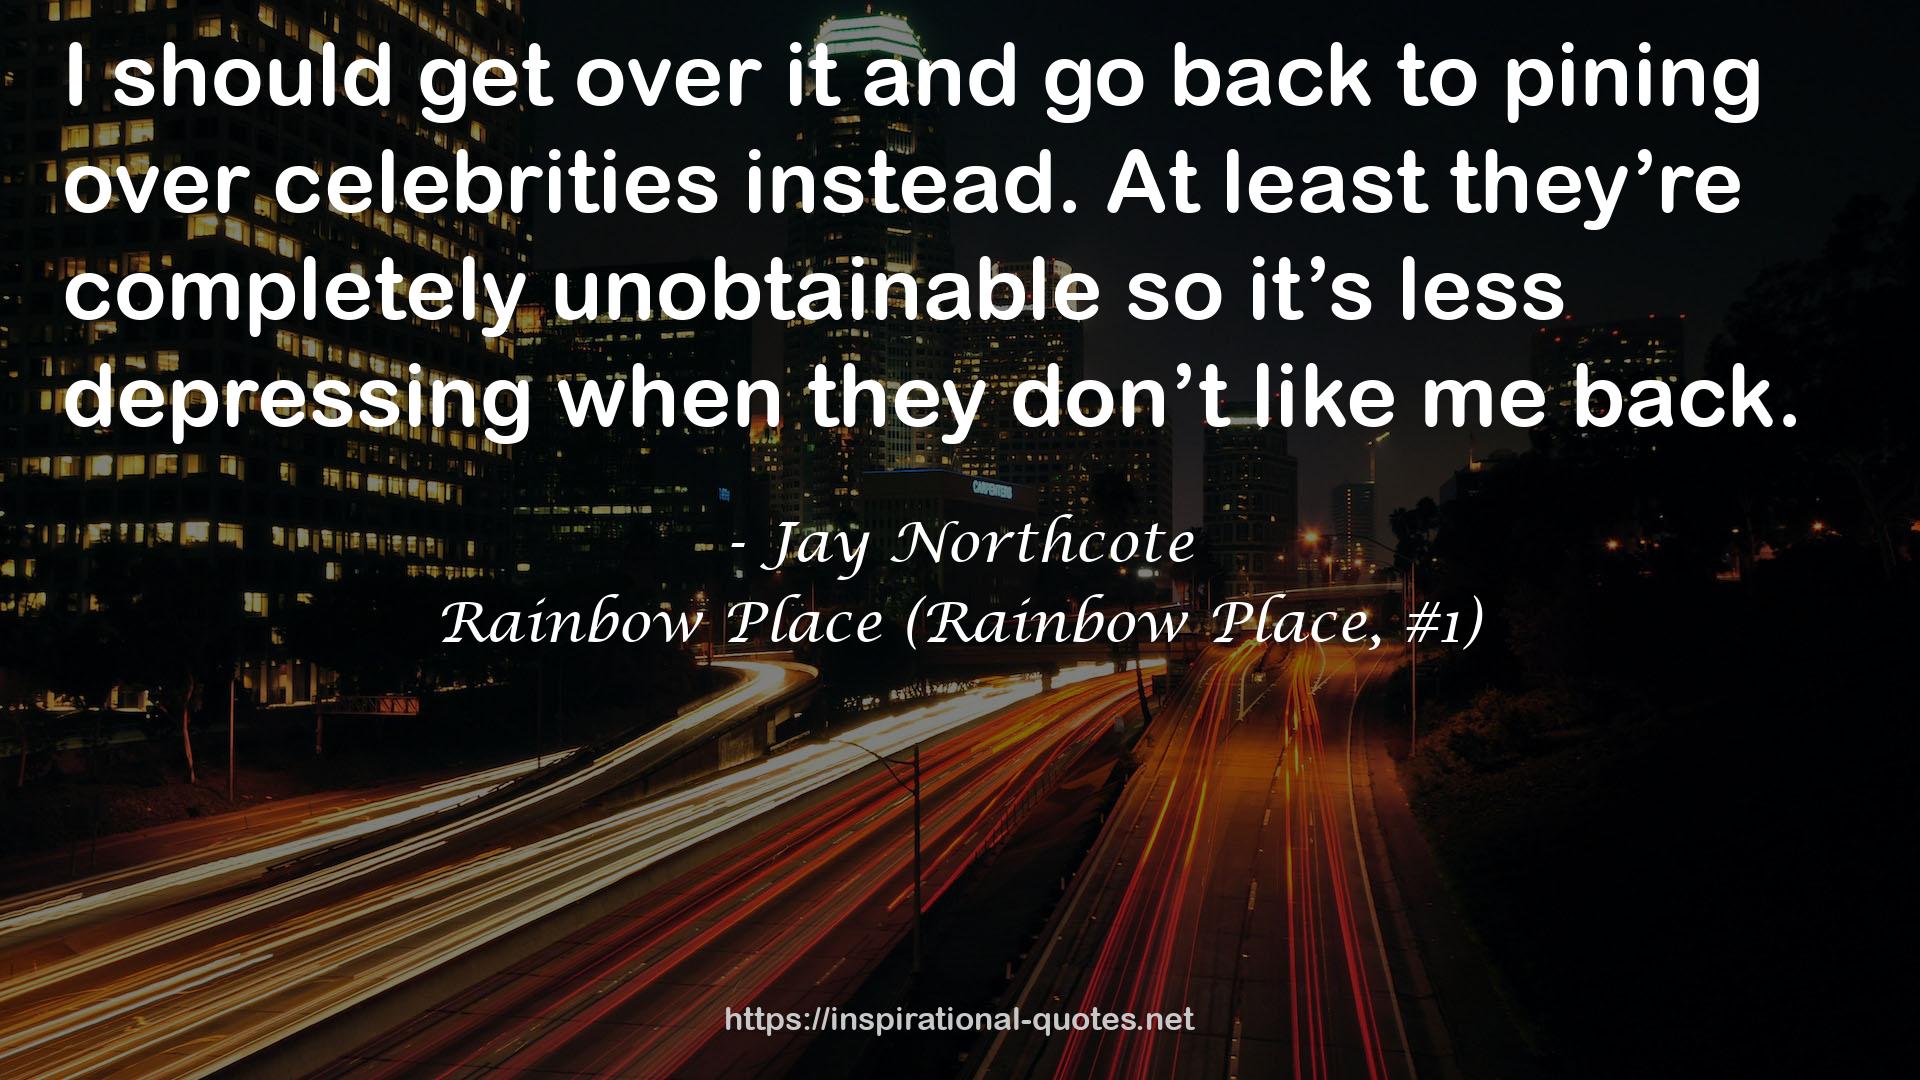 Rainbow Place (Rainbow Place, #1) QUOTES